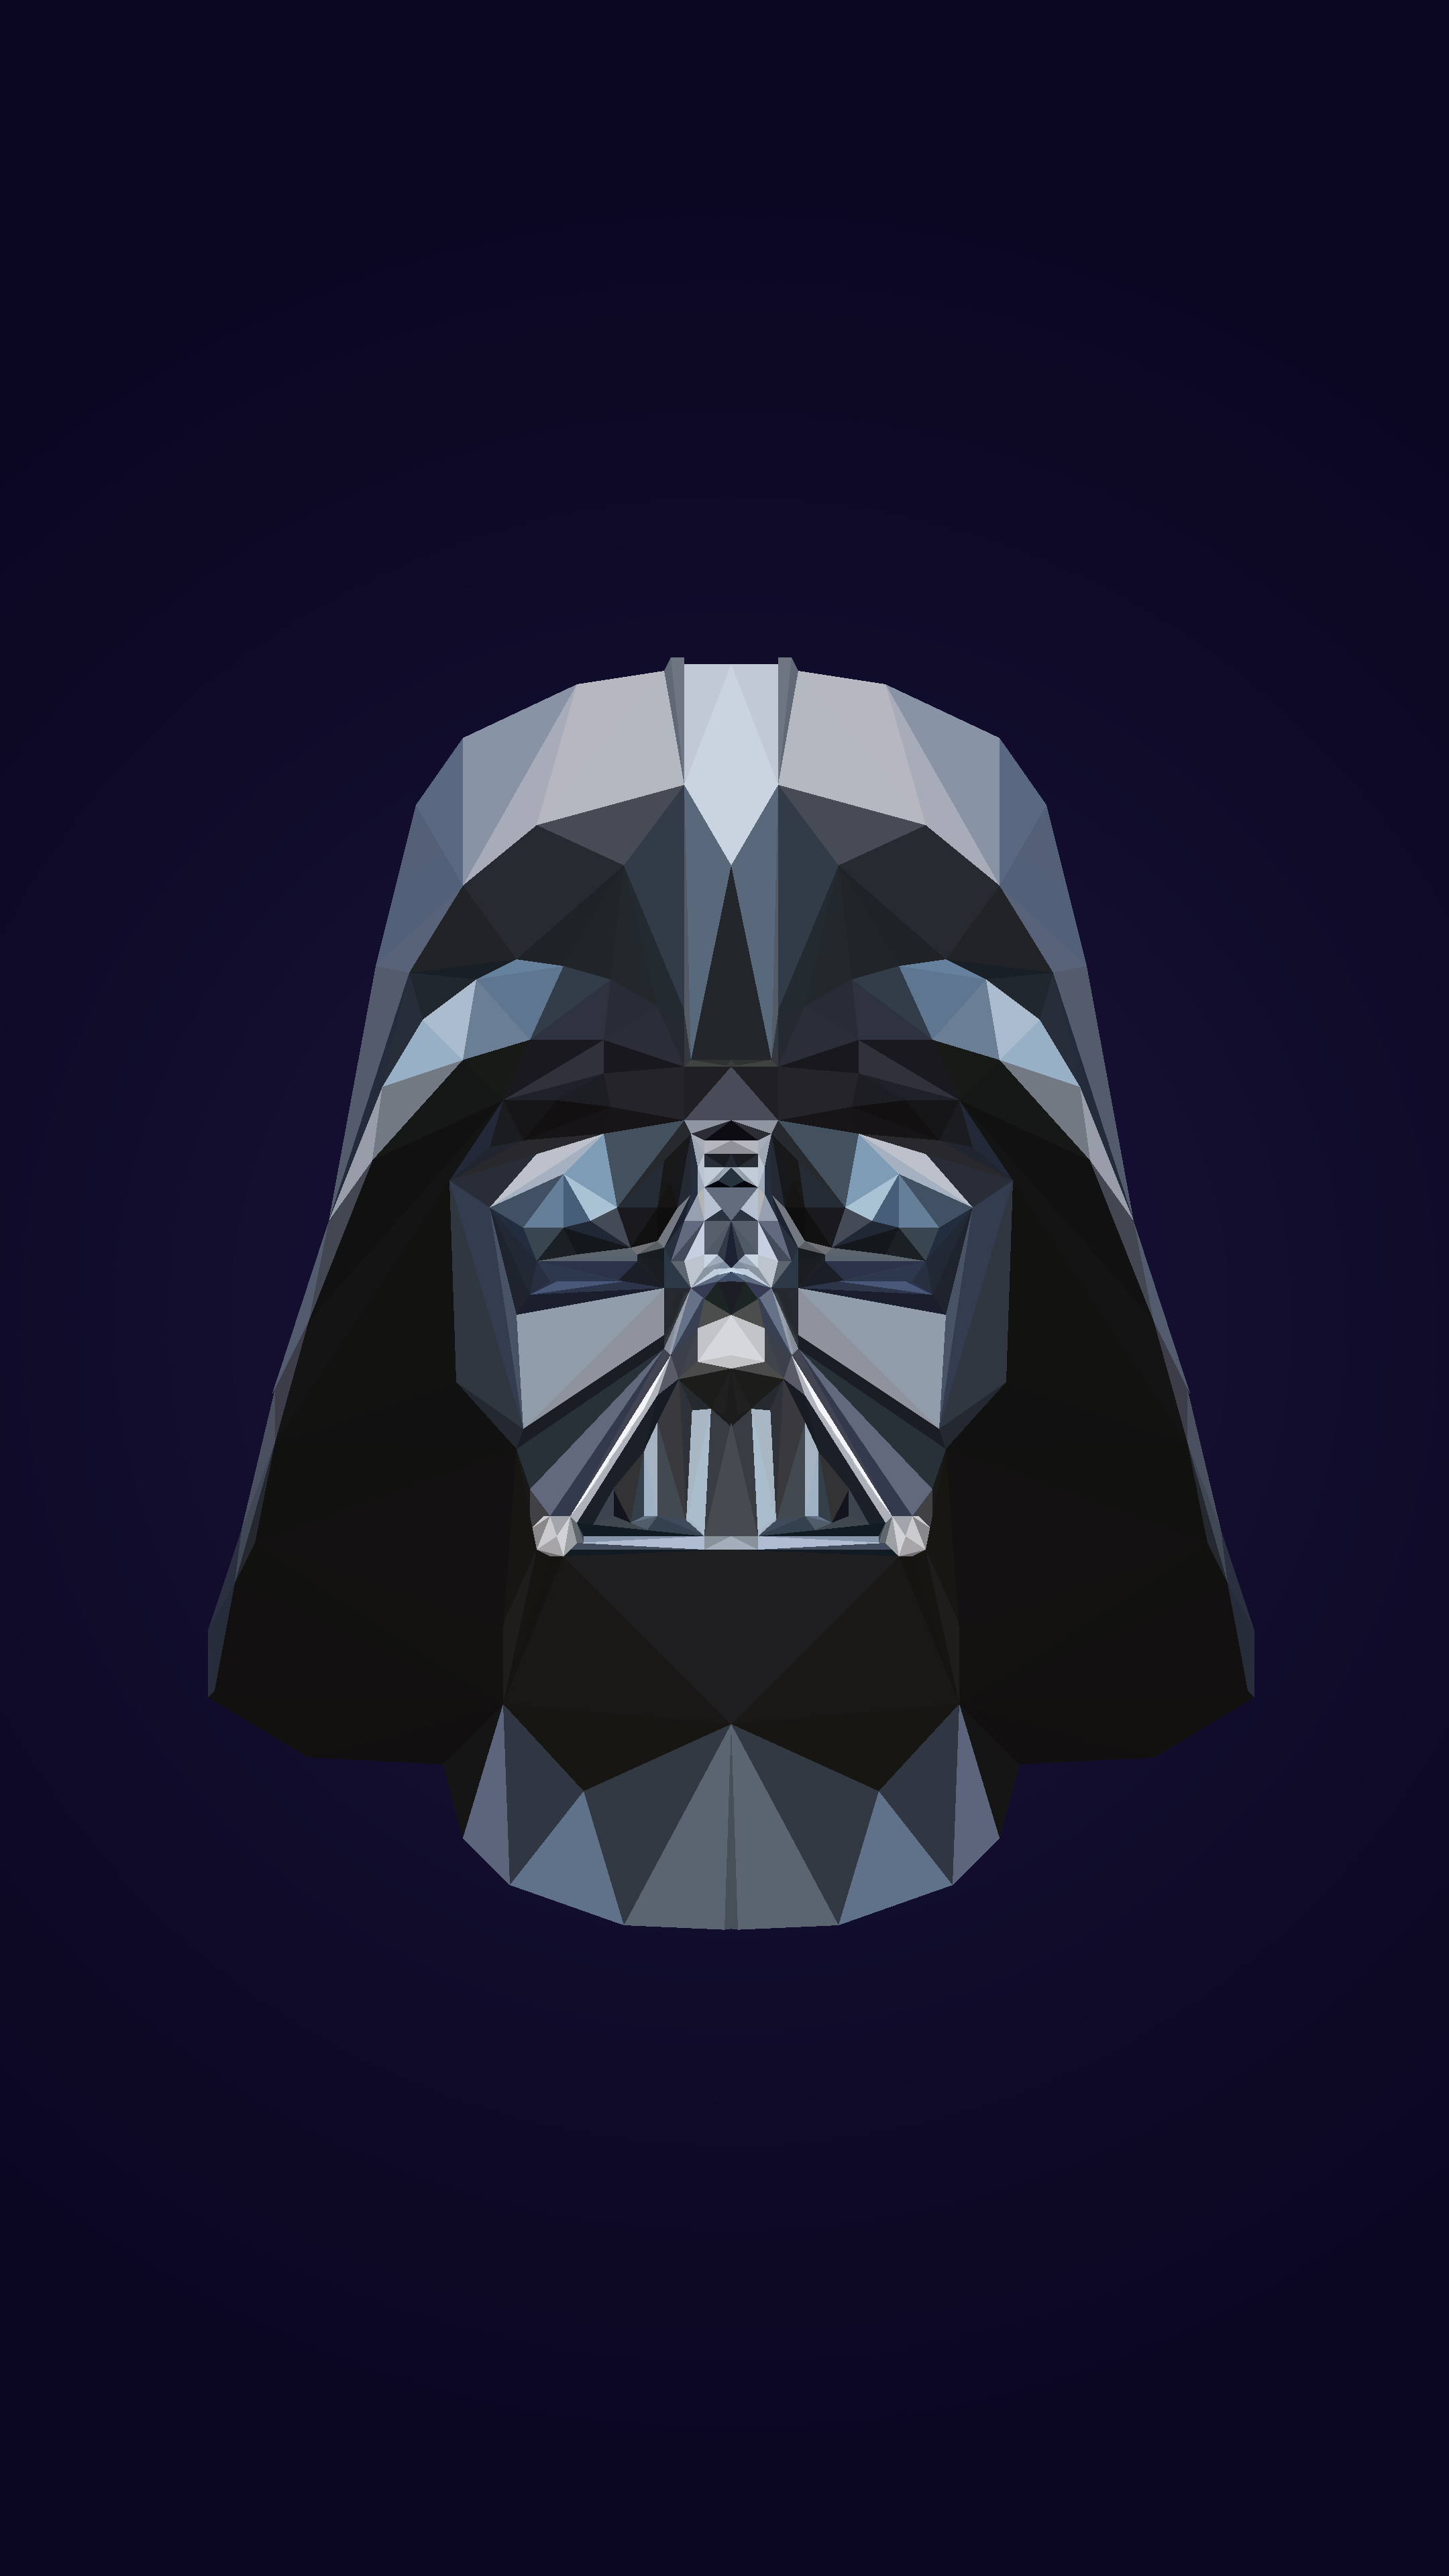 Ultra HD 4K Image for Mobile darth vader low poly phone ...